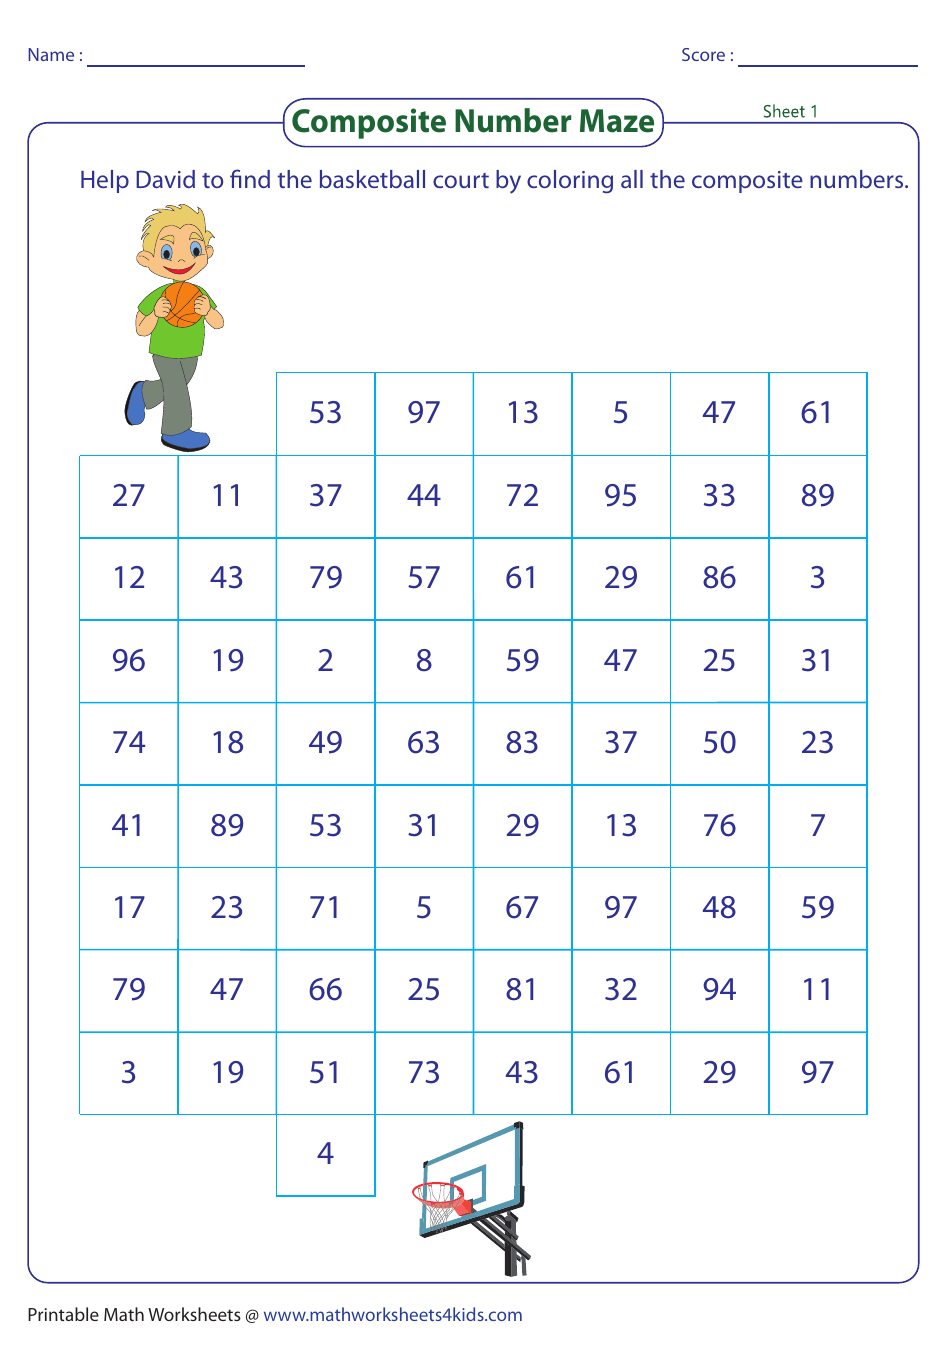 composite-number-maze-worksheet-with-answer-key-basketball-download-printable-pdf-templateroller